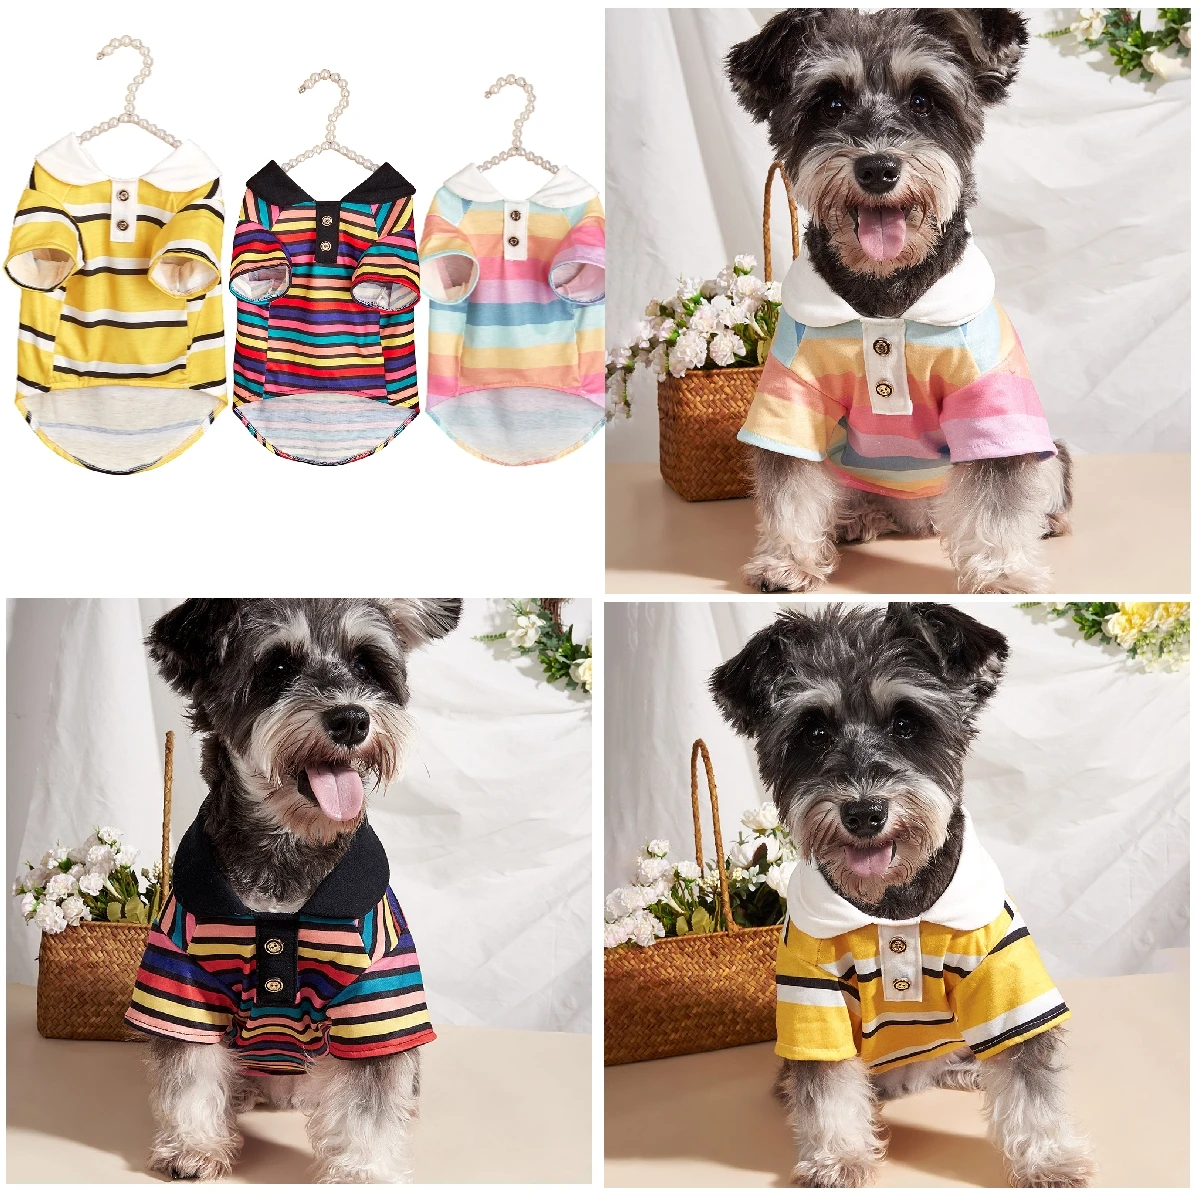 

Fashion Dog Cat Clothes Dogs POLO Shirt for Dogs Cute Cat Warm Pet Apparel for Small Medium Dogs Chihuahua Poodle Pajamas